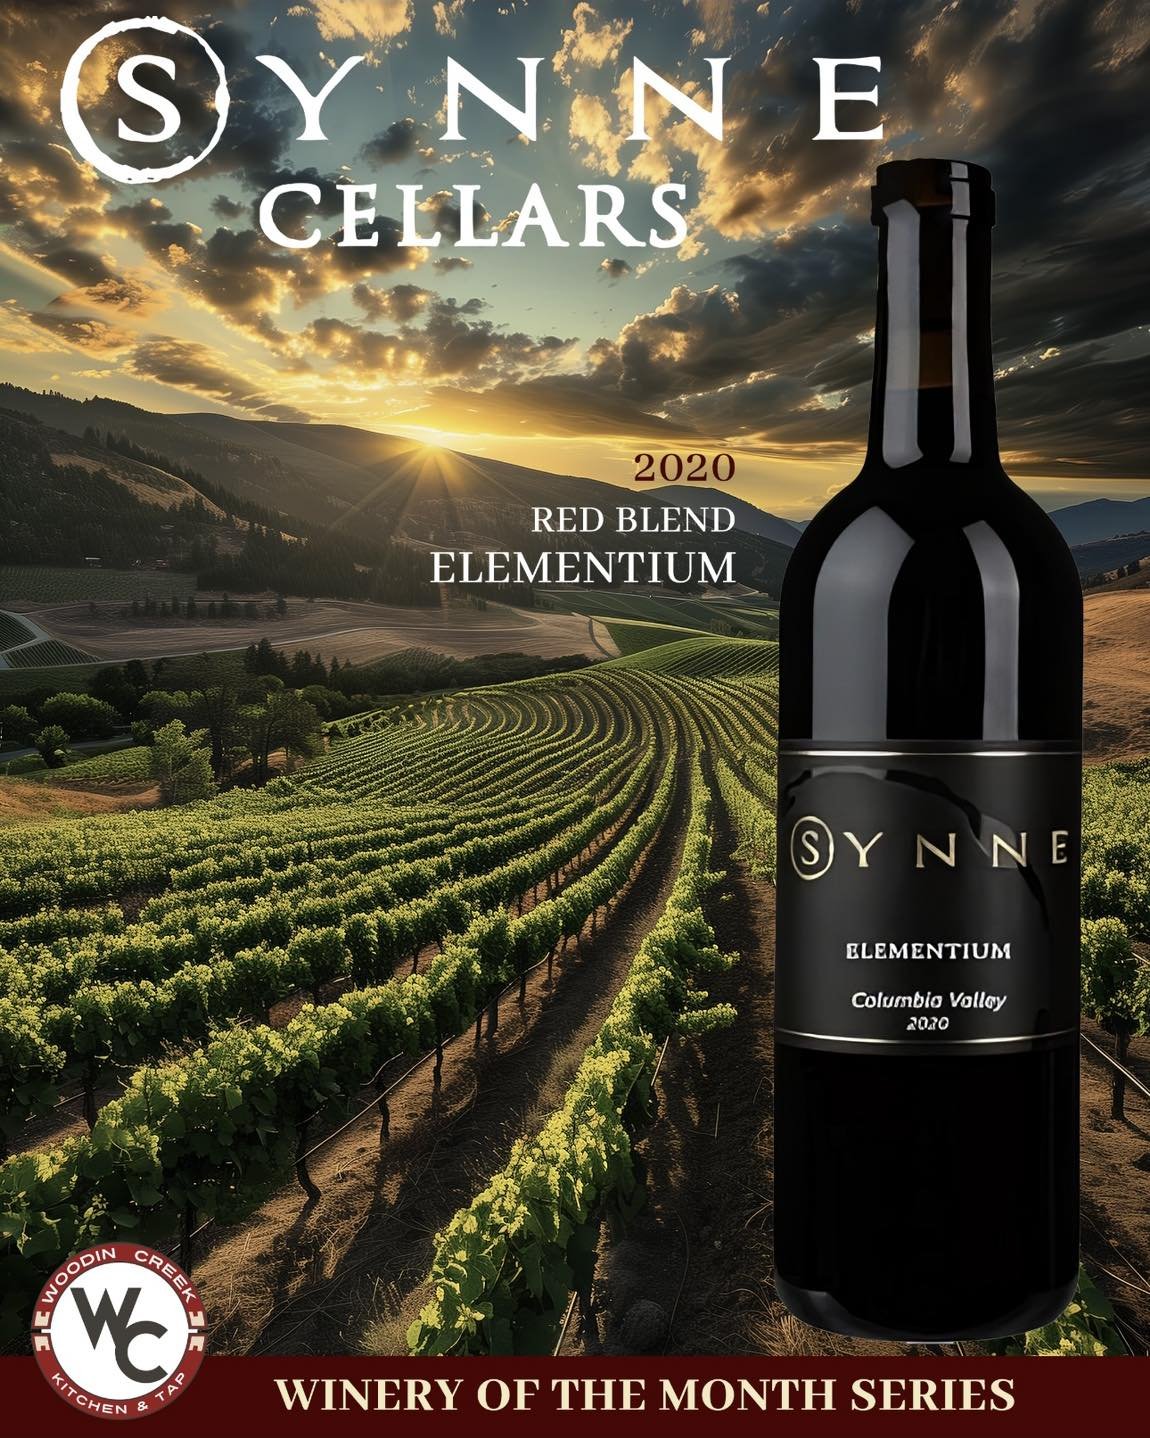 Come down and support of newest winery of the month. Synne Cellars. We are featuring their Red Blend Elementium and their Chardonnay. Wine Down Wednesday is a perfect day. Half off most all bottles of wine from open to close.  #woodincreekkitchen #sy